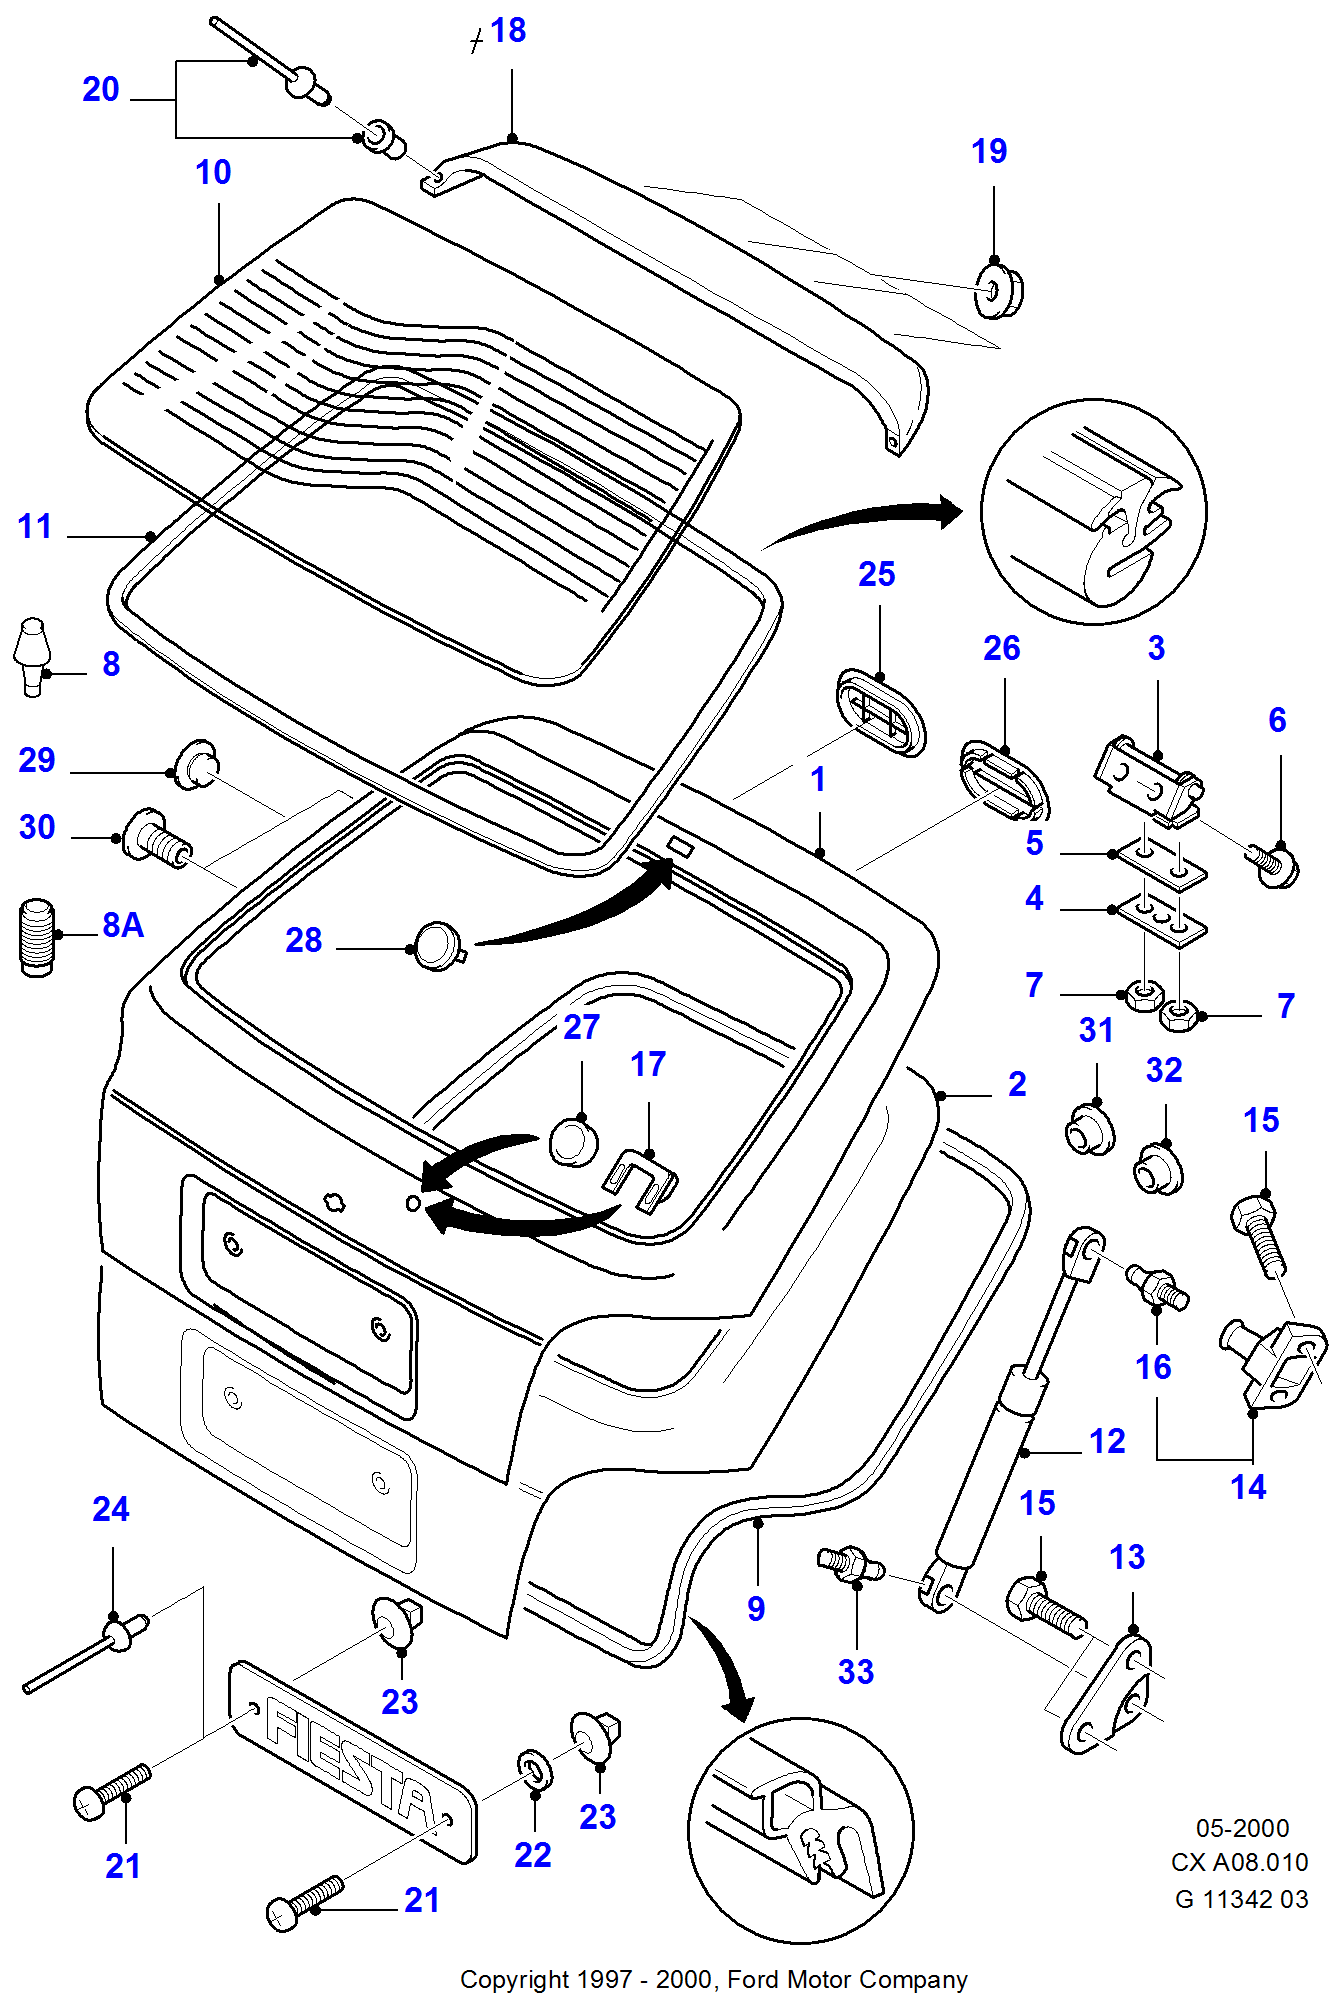 Tailgate And Related Parts för Ford Fiesta Fiesta 1989-1996               (CX)